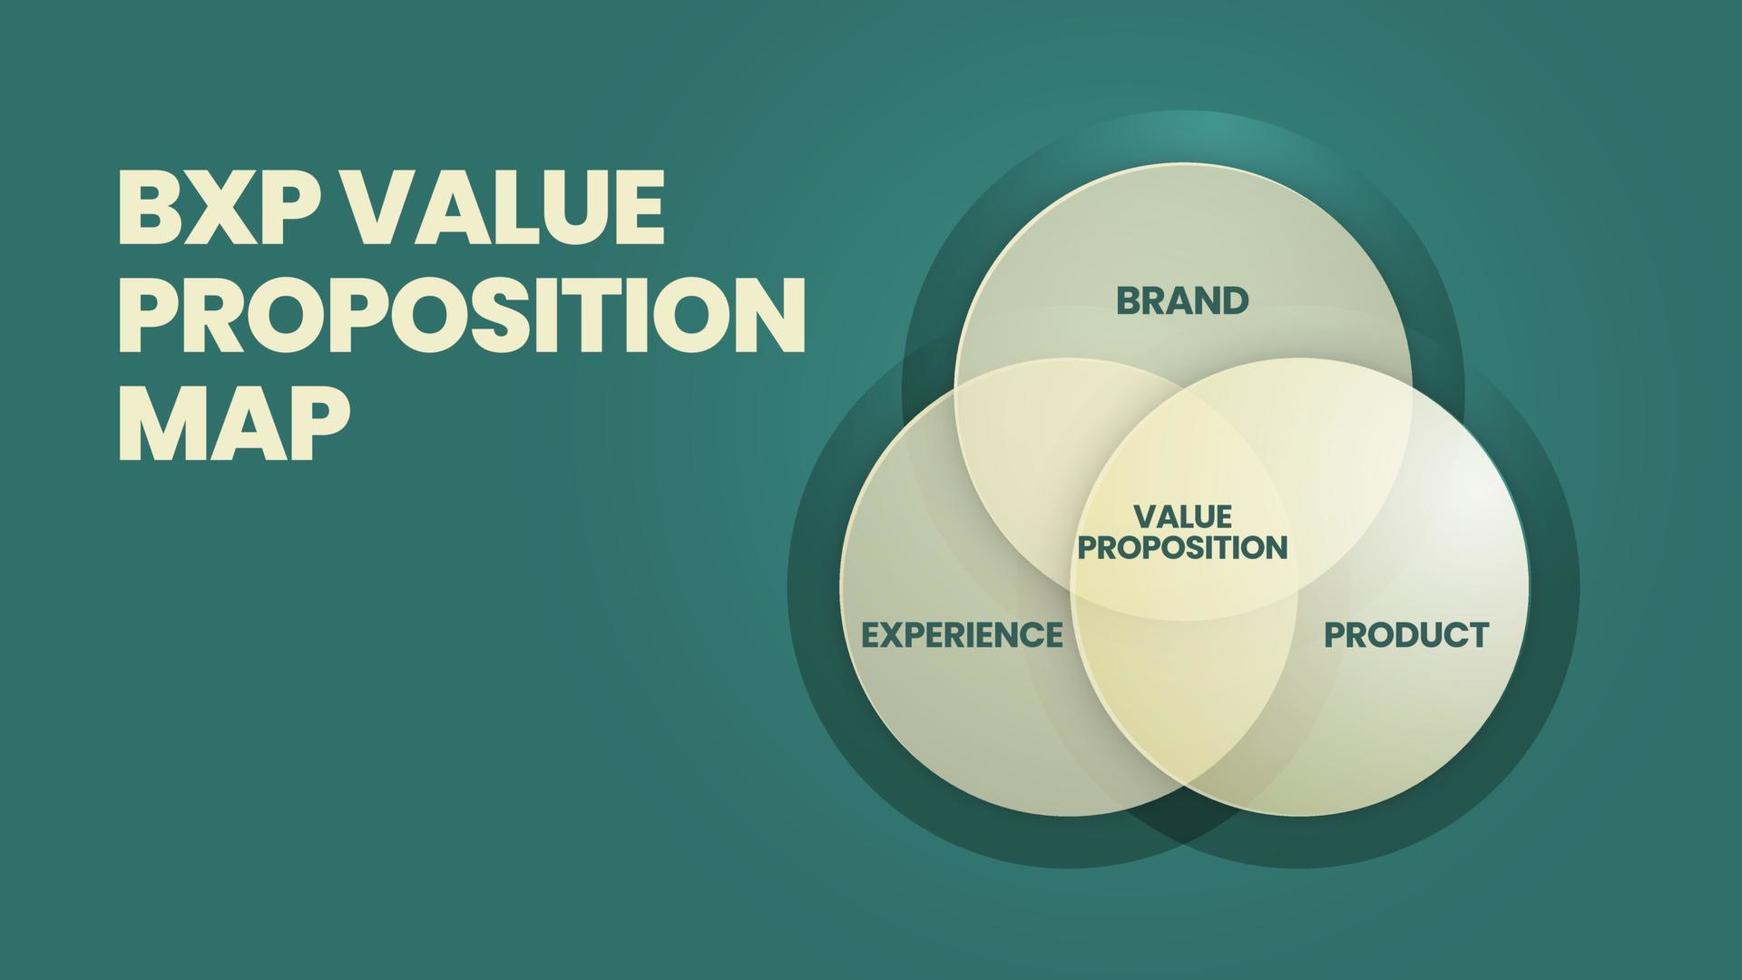 A vector illustration of value proposition well-rounded by an effort to carve out the Brand, Experience, and Product. The assets and efforts beget are Attention, Assurance, and Advocates for customer